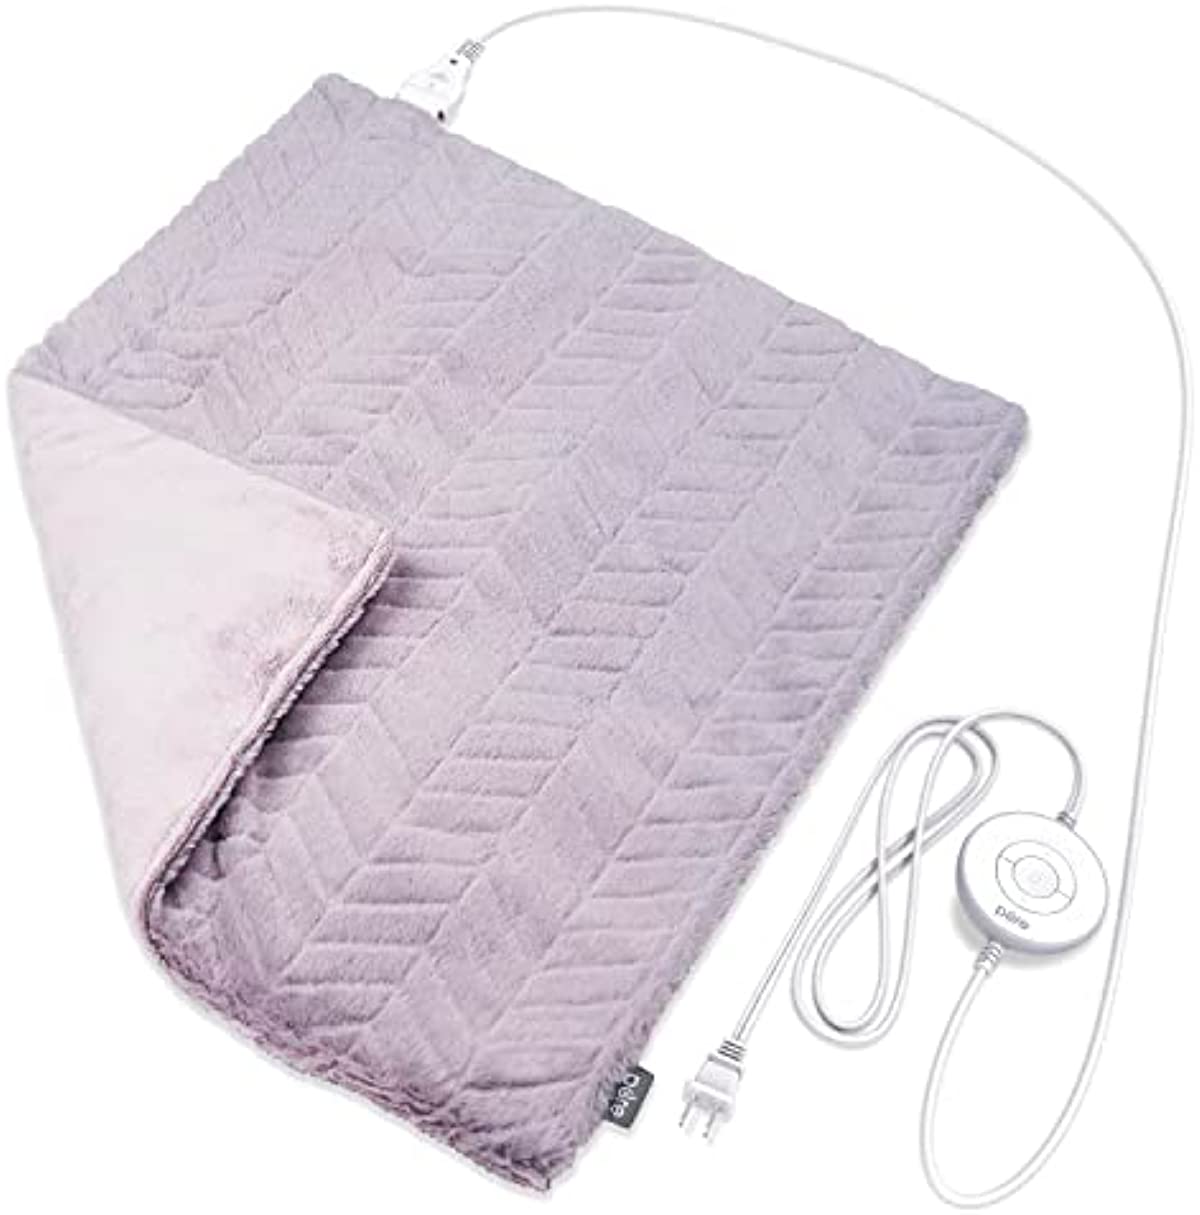 Pure Enrichment® PureRadiance™ Ultra-Wide Luxury Heating Pad for Cramps & Back Pain Relief, Modern Design, Soft Faux Fur, Micromink, 6 Heat Settings, Machine Washable, Large, 20” x 24” (Amethyst Dusk)